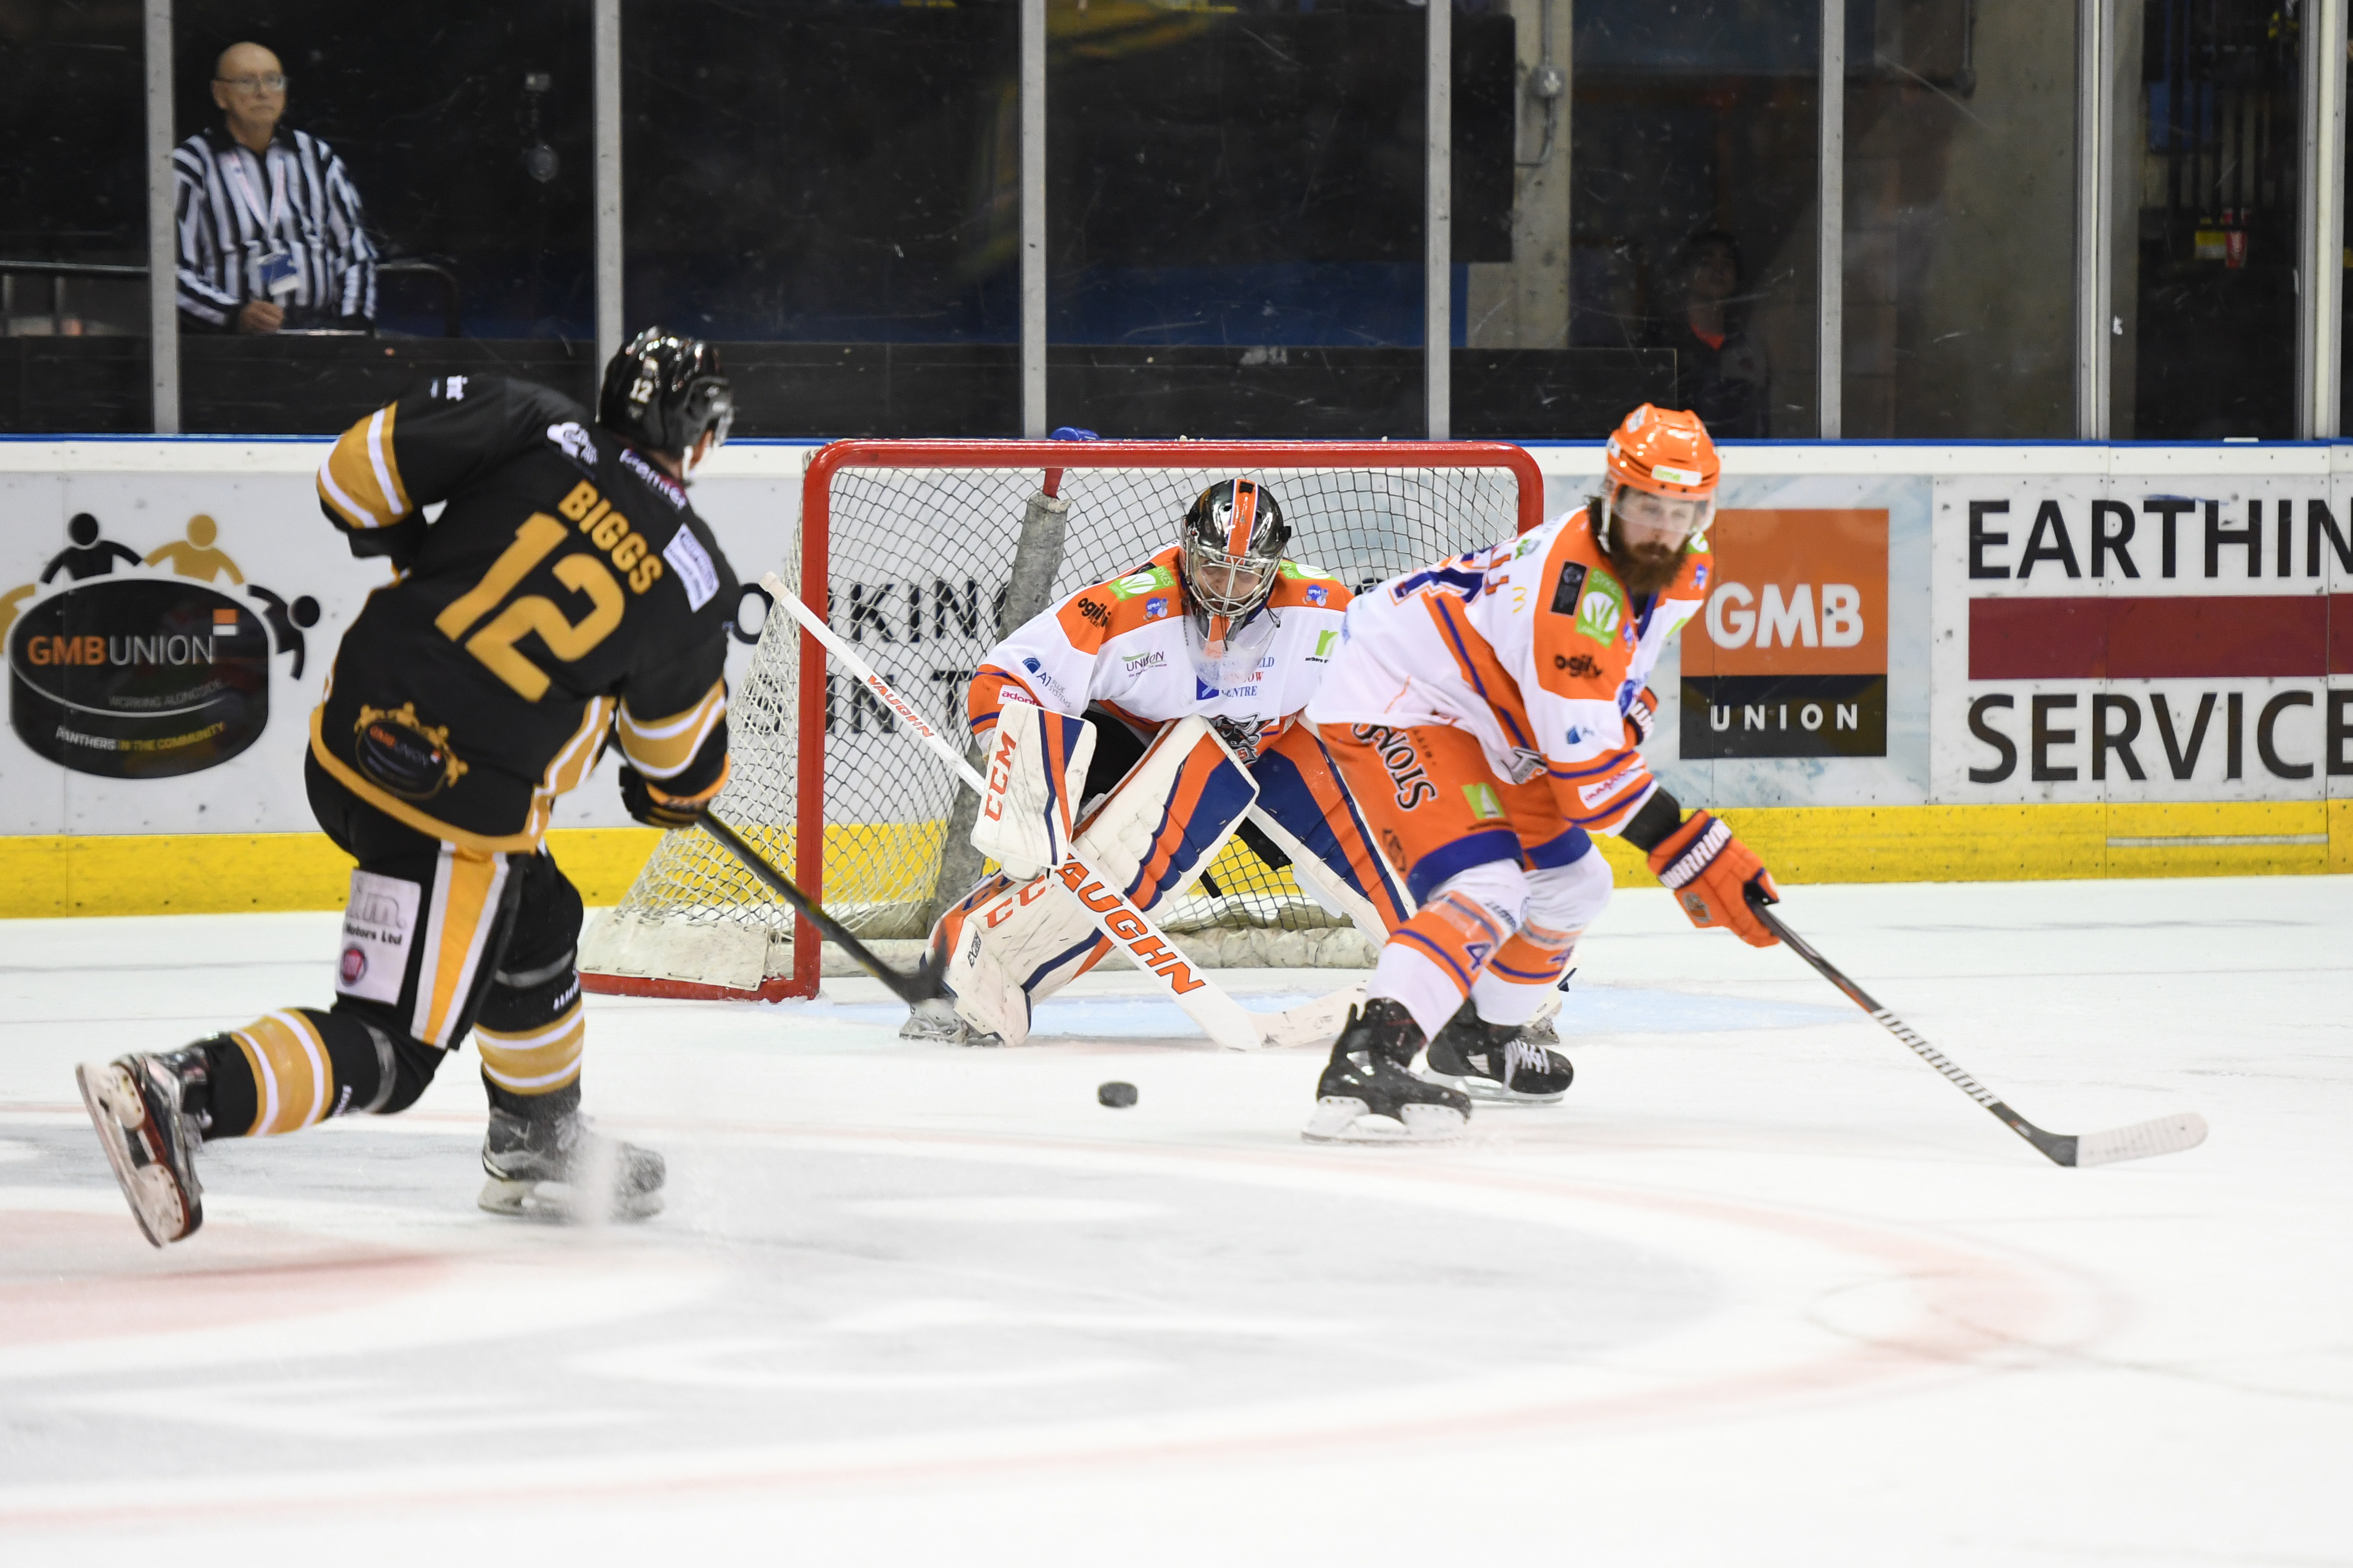 Highlights: Panthers vs Steelers - 13/10/18 Top Image